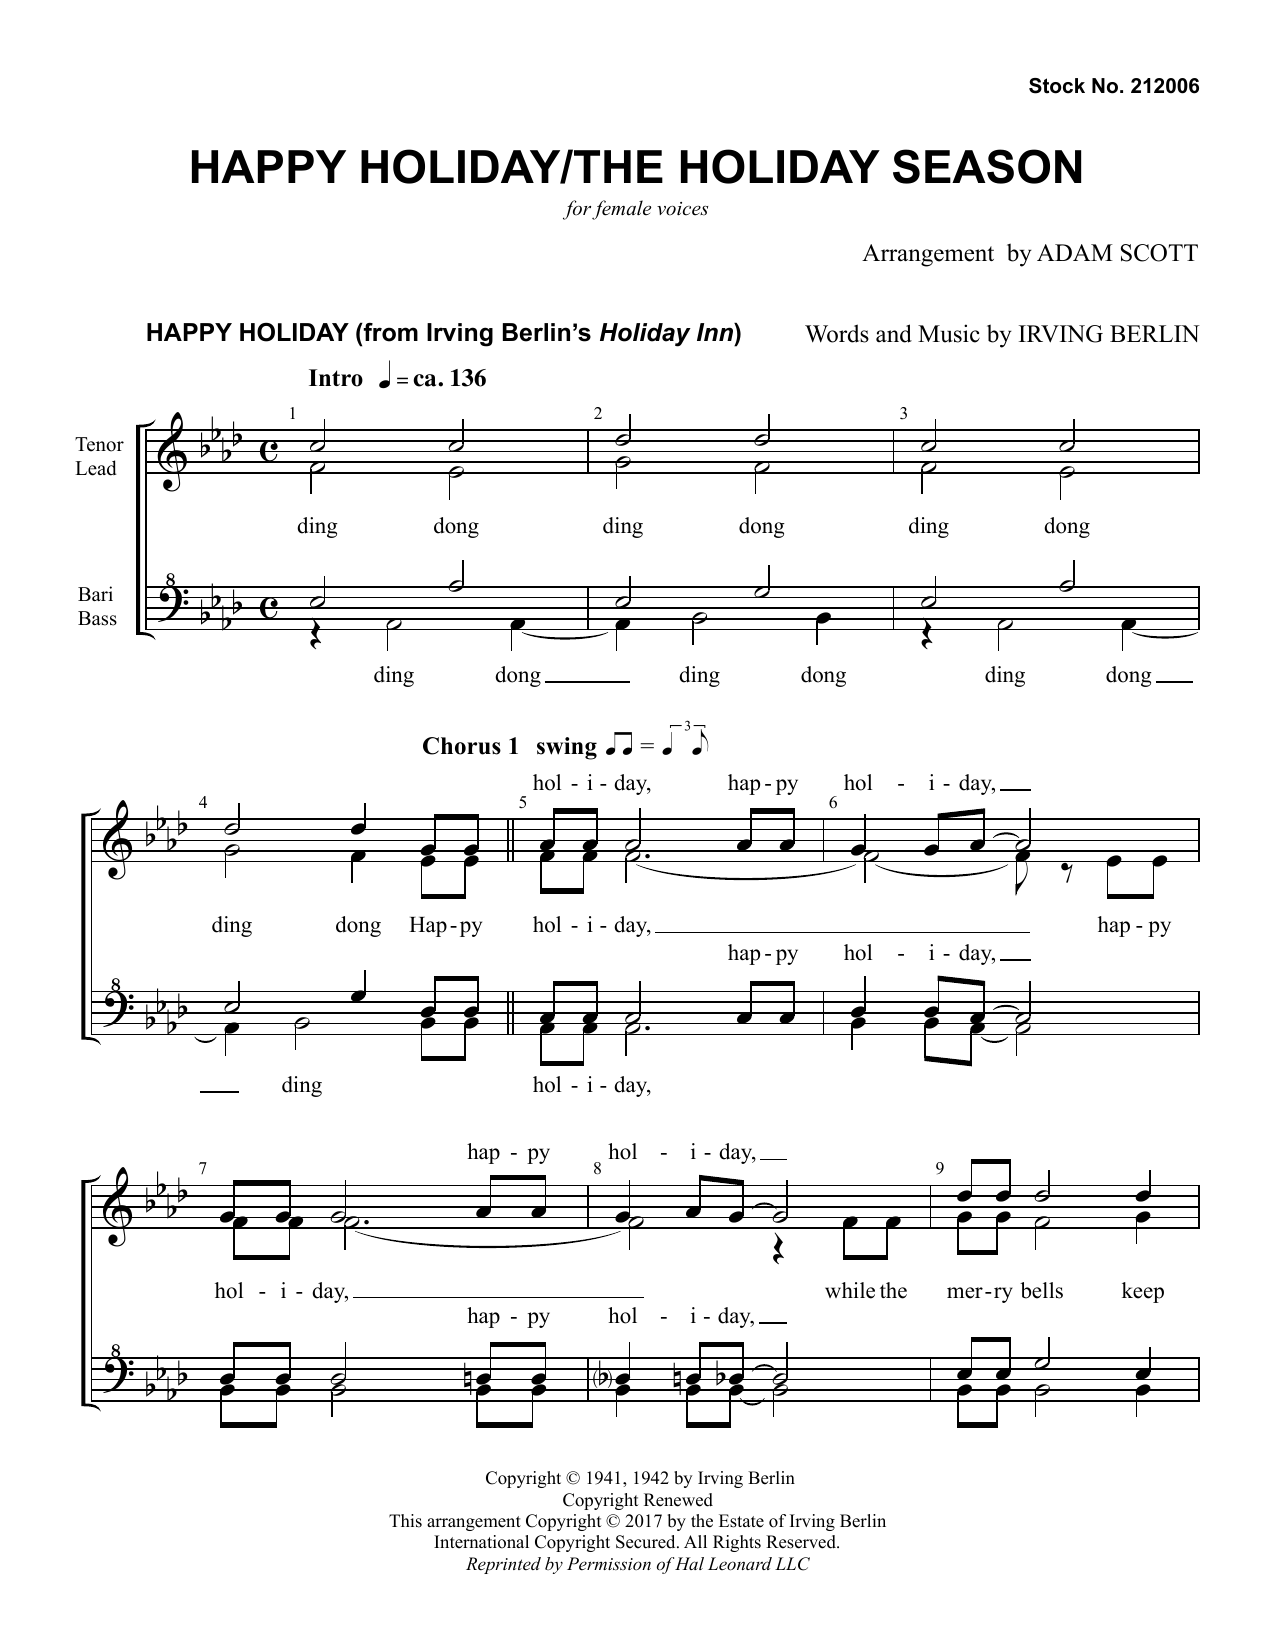 Download Andy Williams Happy Holiday/The Holiday Season (arr. Sheet Music